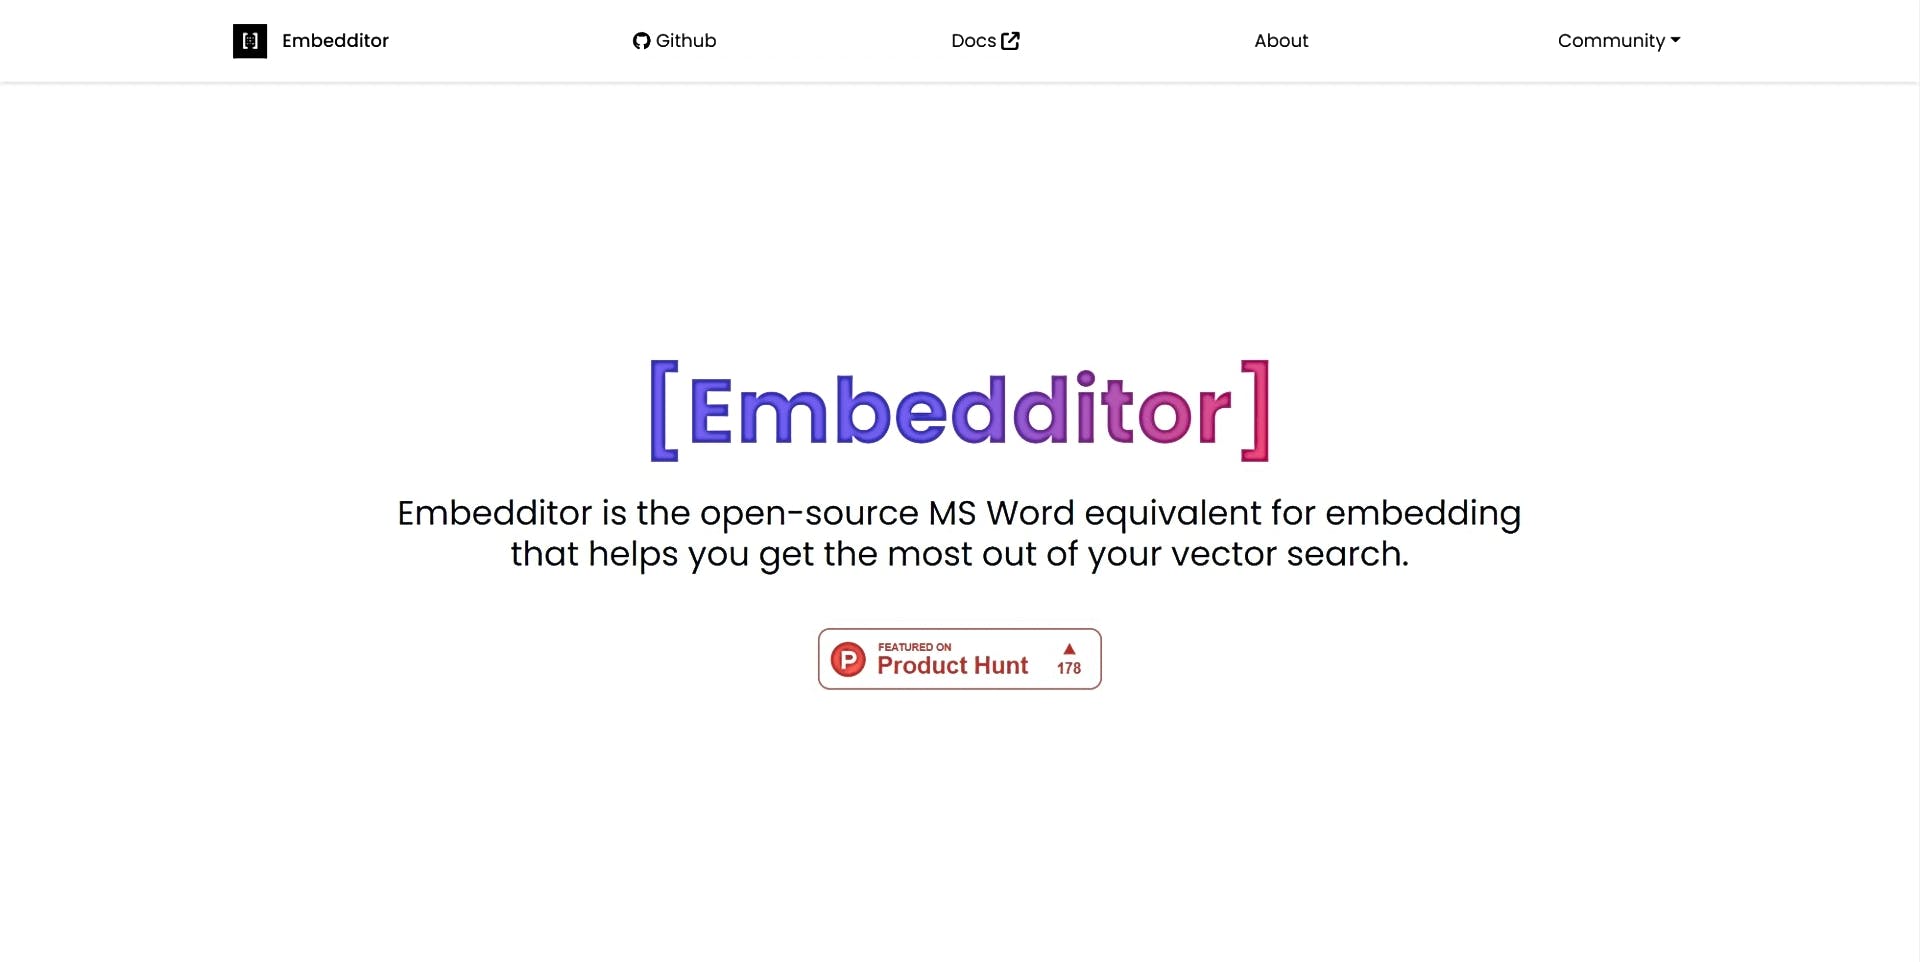 Embedditor featured